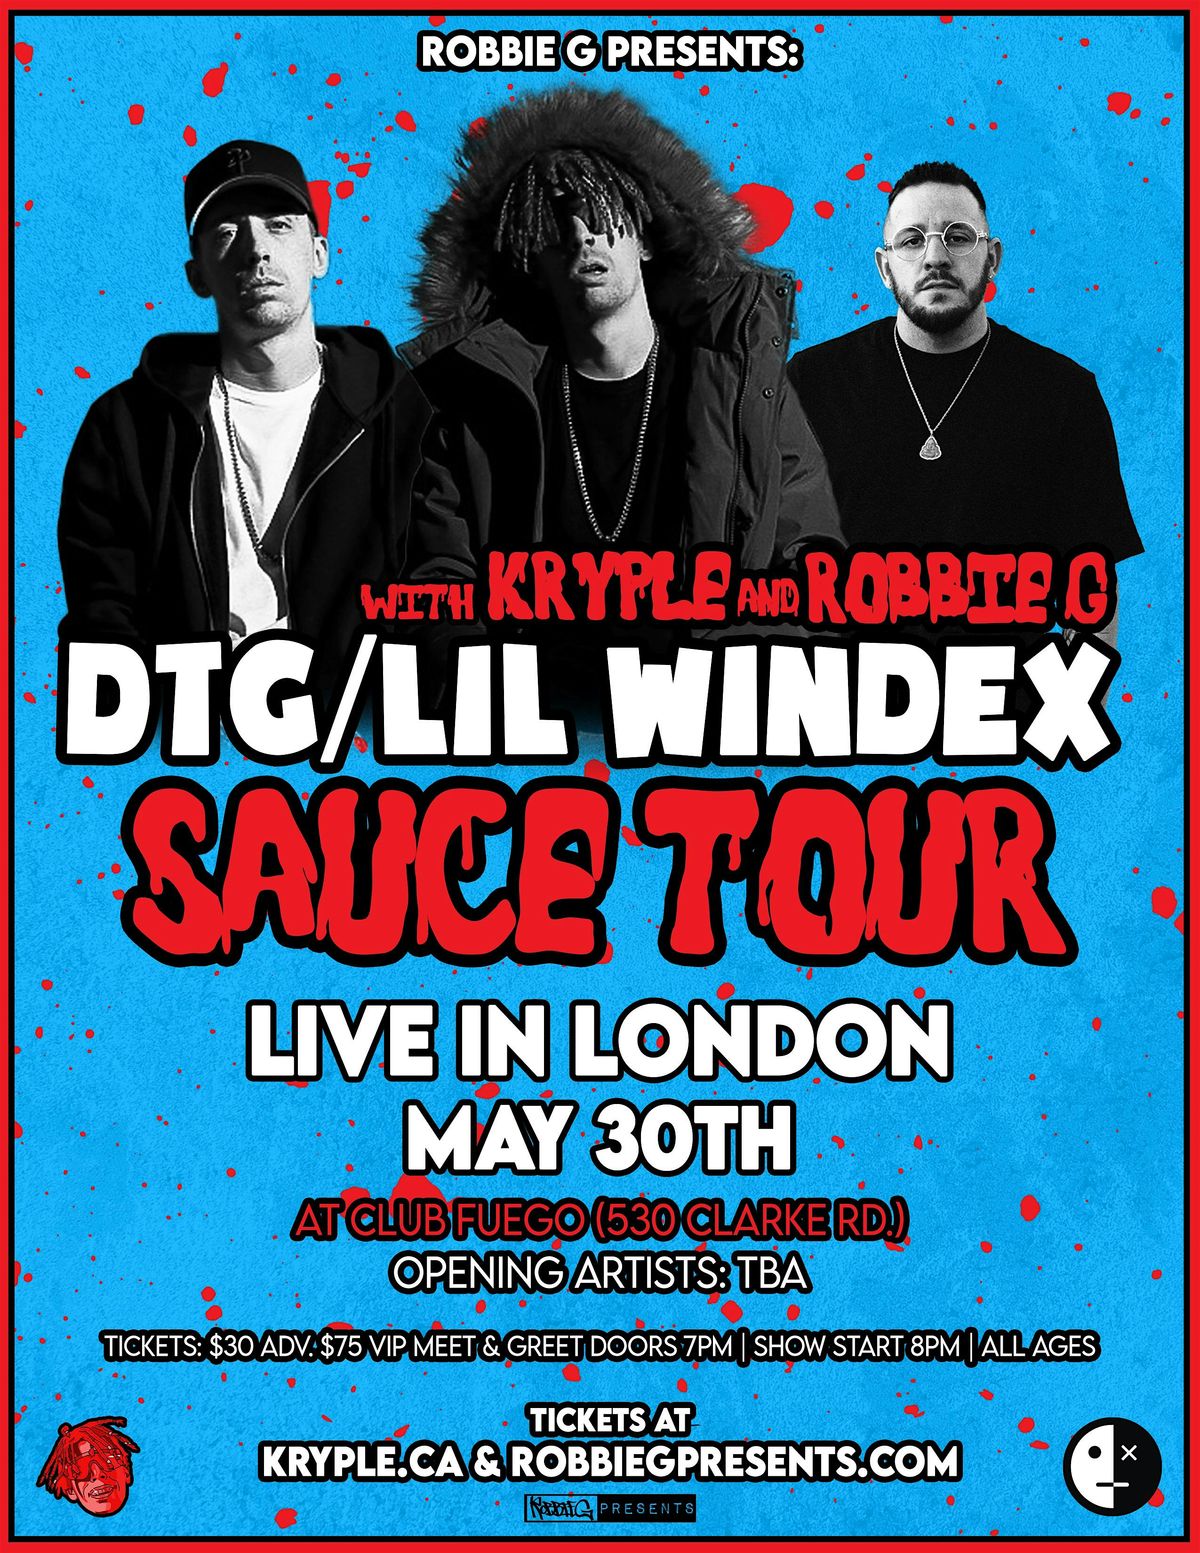 DTG\/Lil Windex in Winnipeg June 16 at Bull Dog Event Centre with Kryple